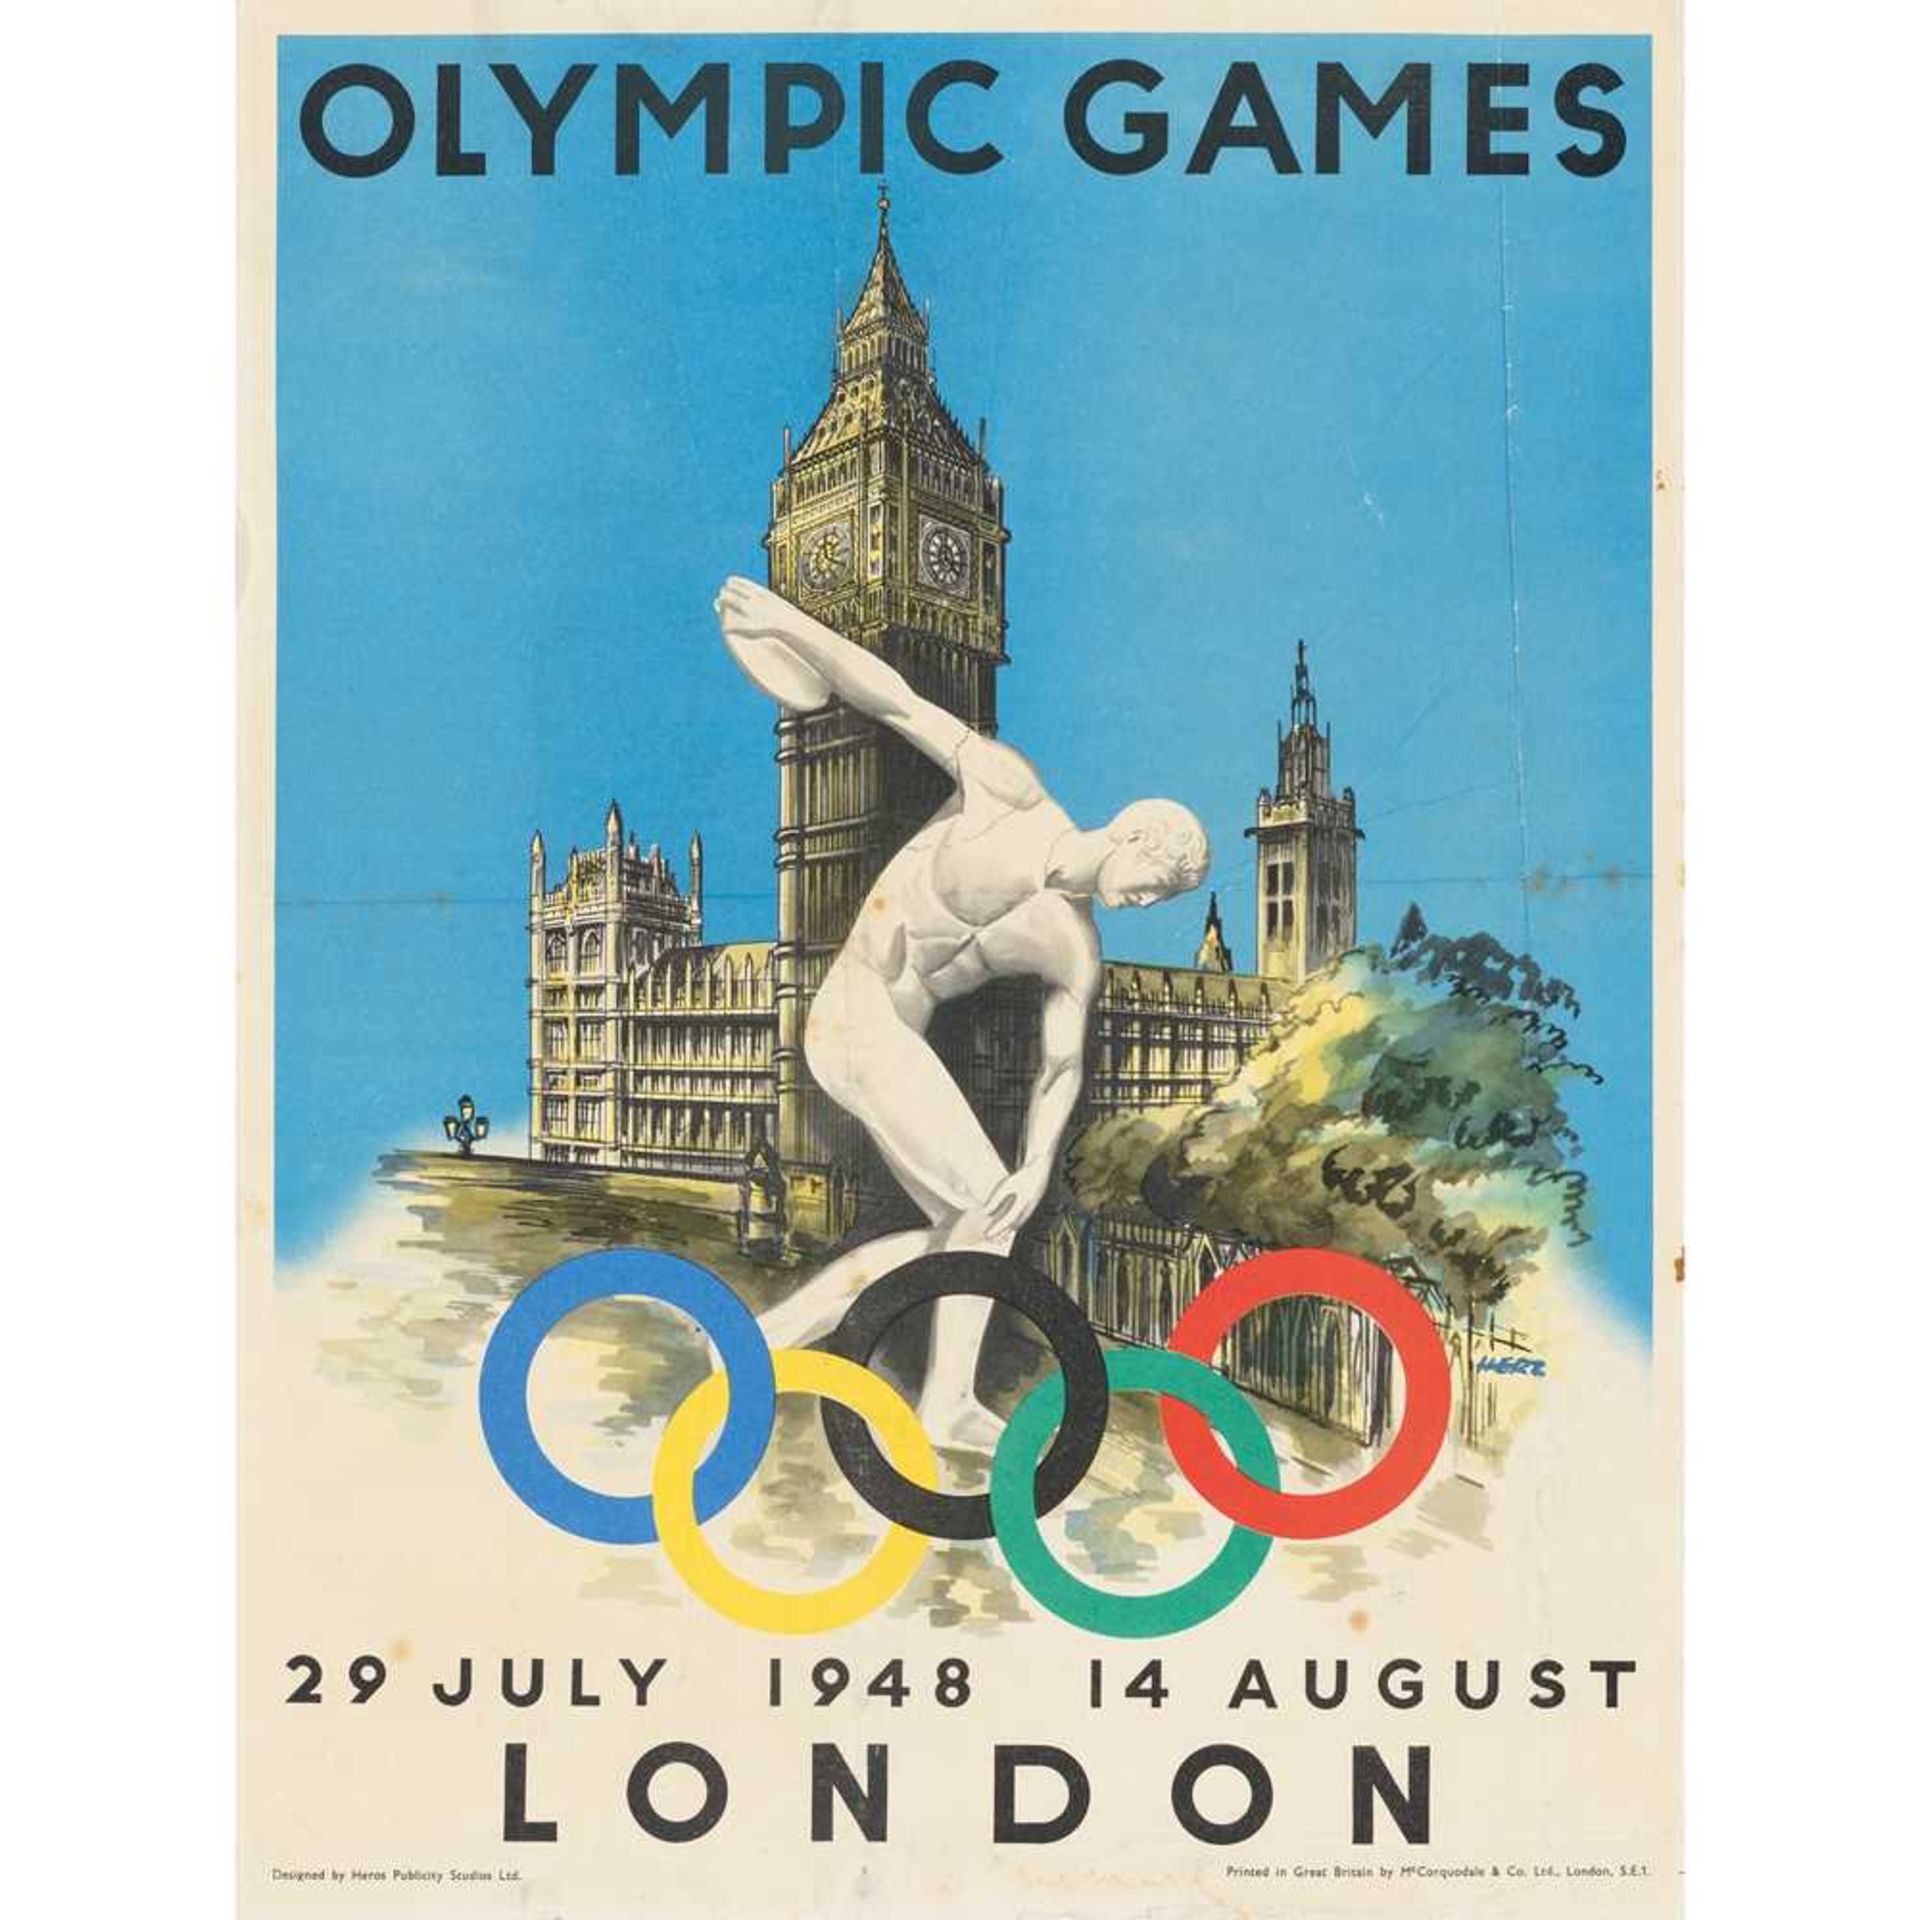 WALTER HERZ OLYMPIC GAMES